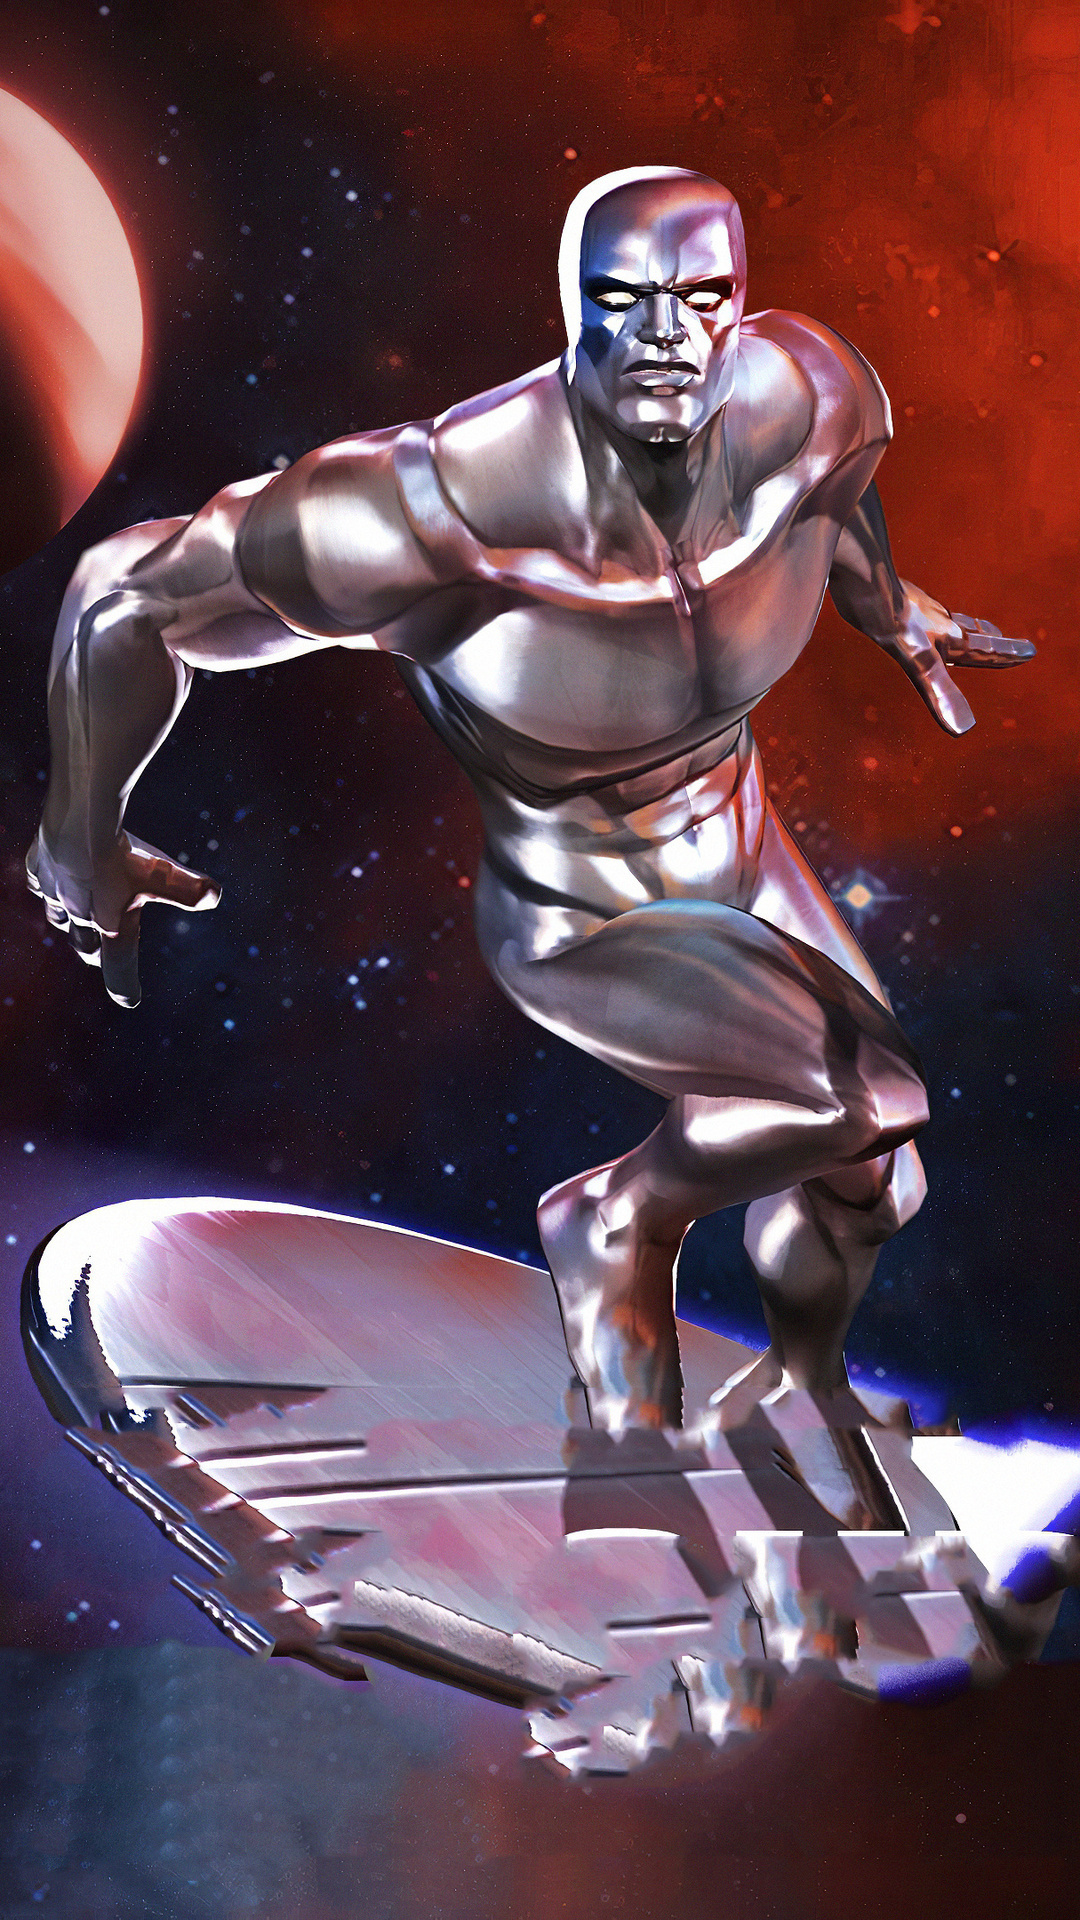 Silver Surfer Contest of Champions, 4K iPhone wallpapers, 1080x1920 Full HD Handy